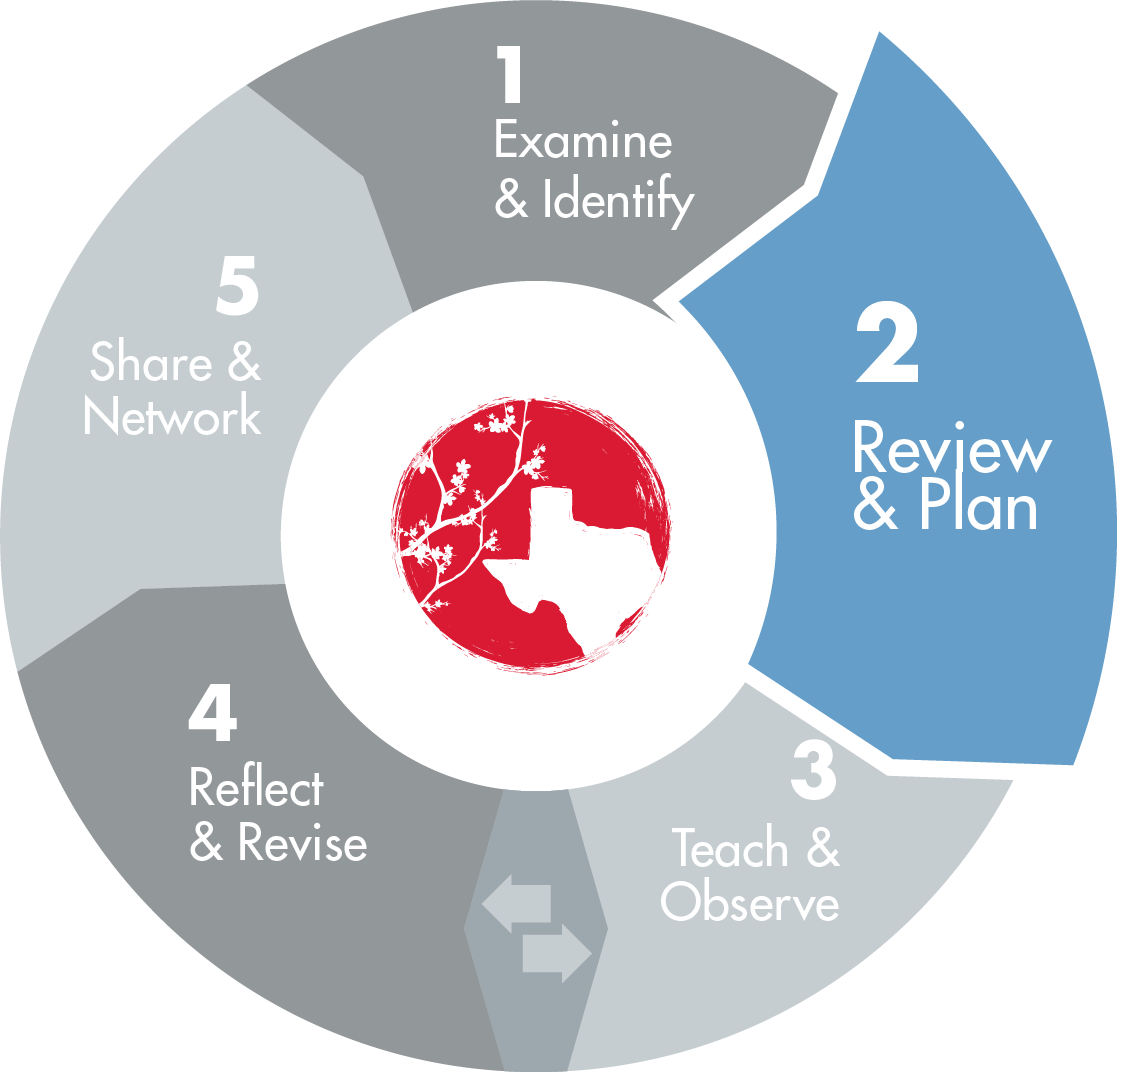 TEXAS LESSON STUDY  5 PHASES - 1. Examine & Identify, 2. Review & Plan, 3. Teach & Observe, 4. Reflect & Revise and 5. Share & Network,  where phase 2 is visually selected